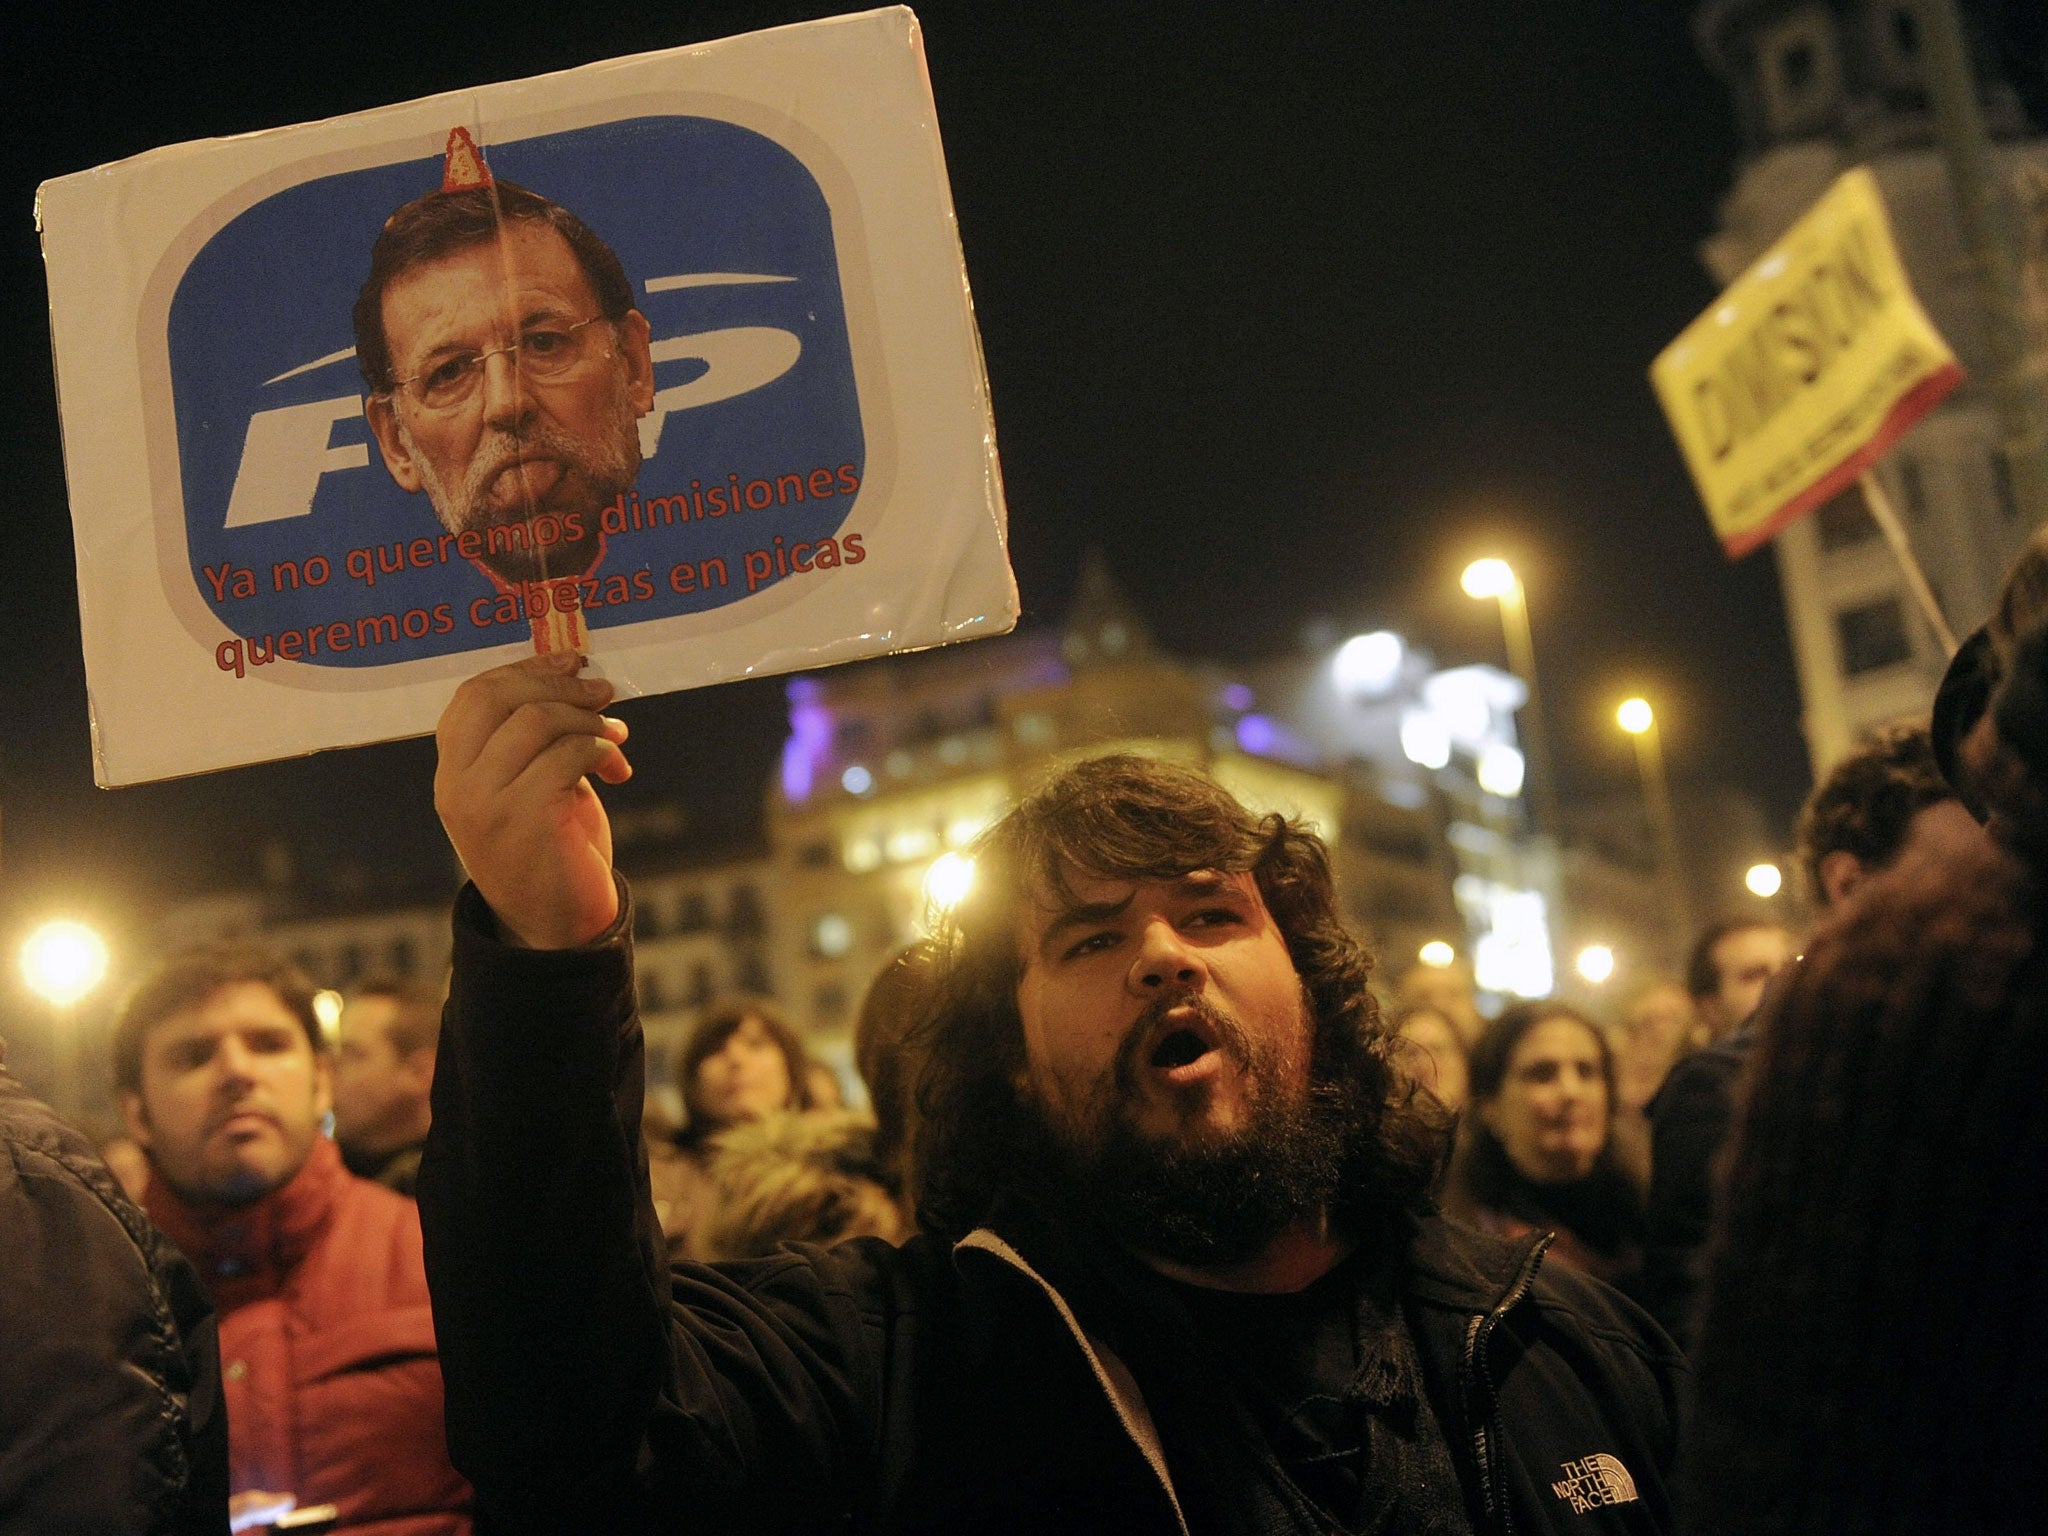 January 31, 2013: A man holds a placard depicting Spanish Prime Minister Mariano Rajoy and reading "We don't even want resignations, we want heads on spike" as he takes part in a demonstration against corruption scandals implicating the PP (Popular Party